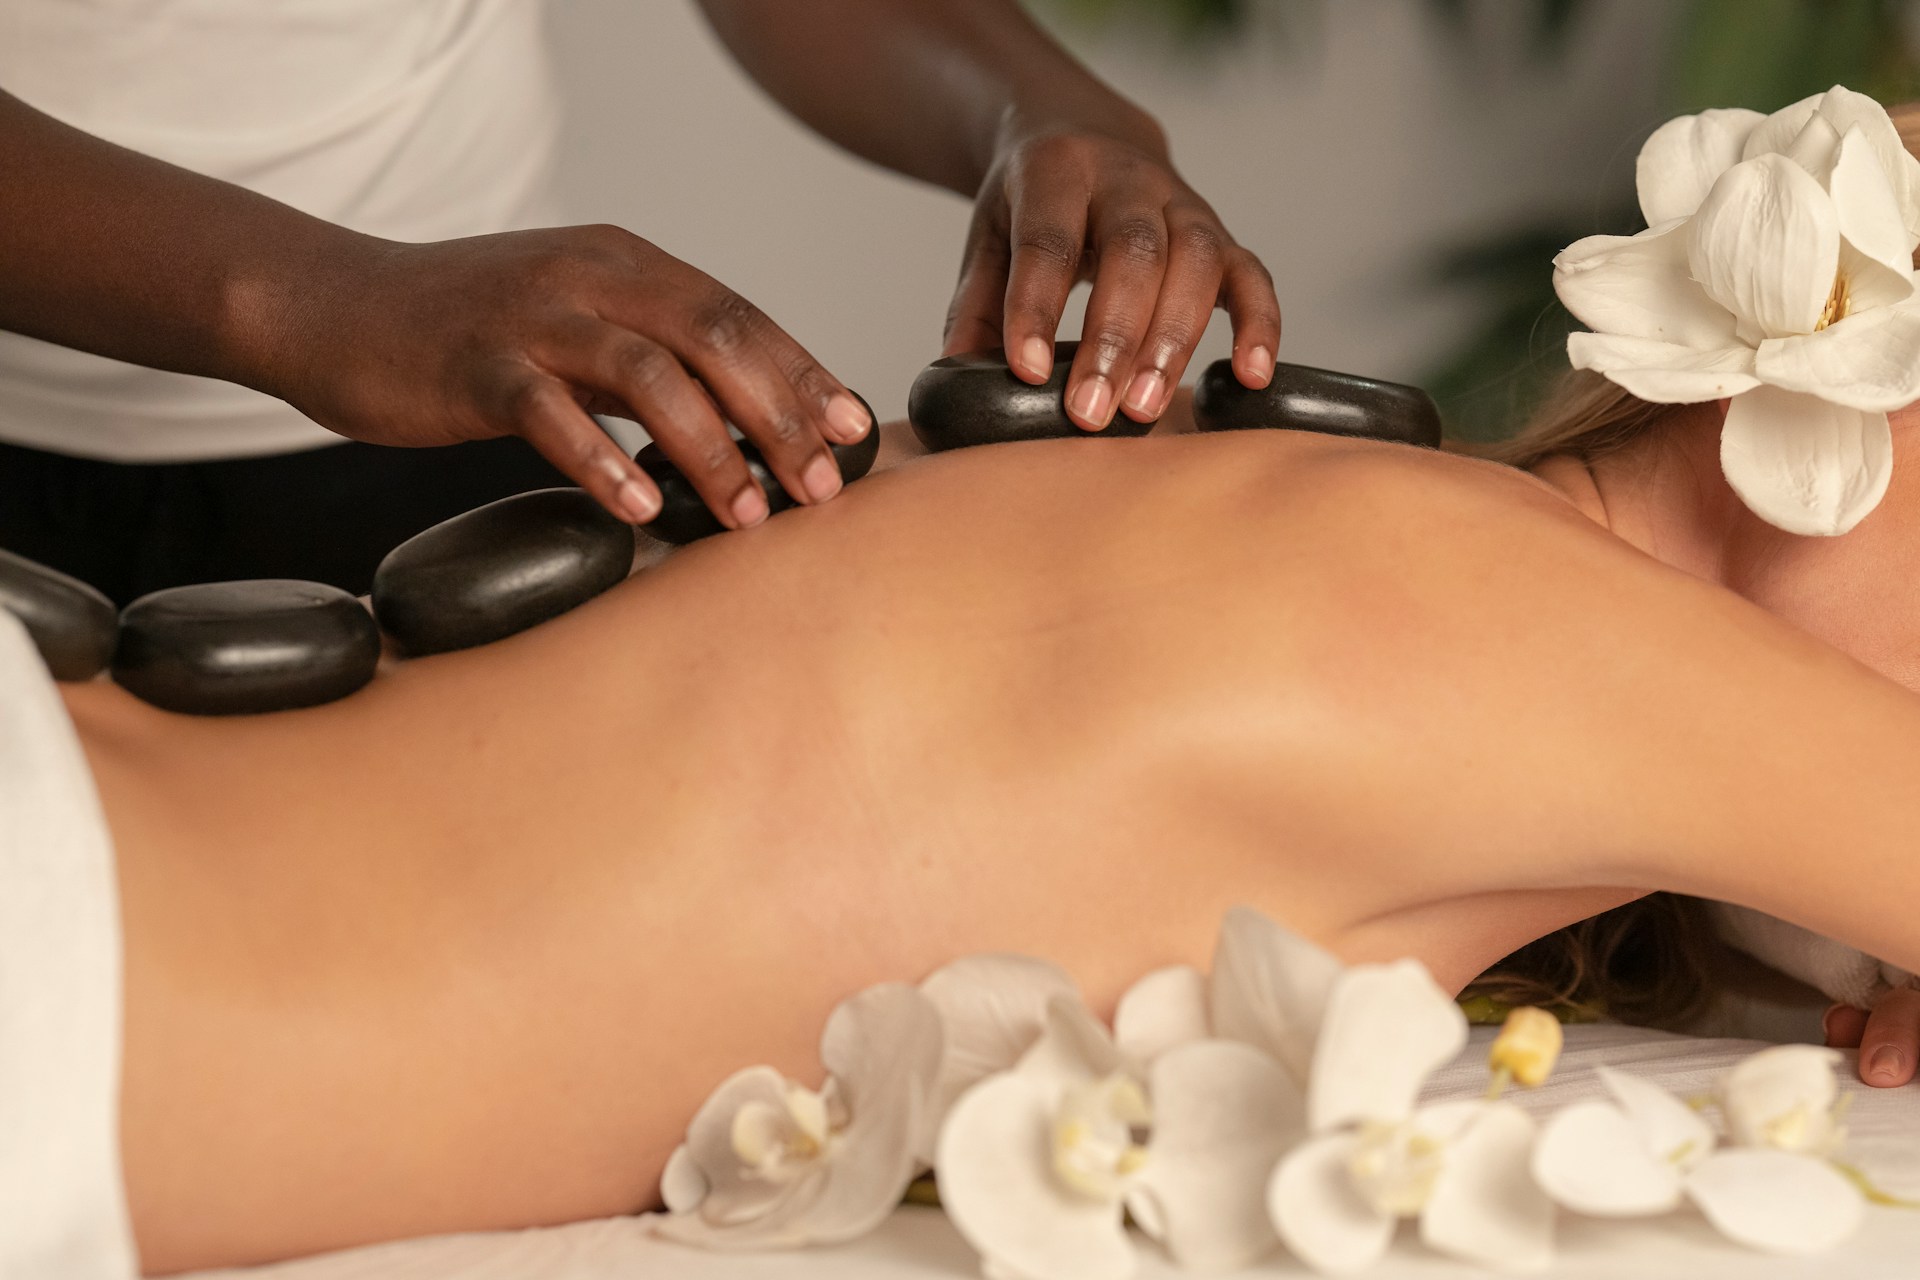 How Tantra Massage Can Improve Your Well-Being 